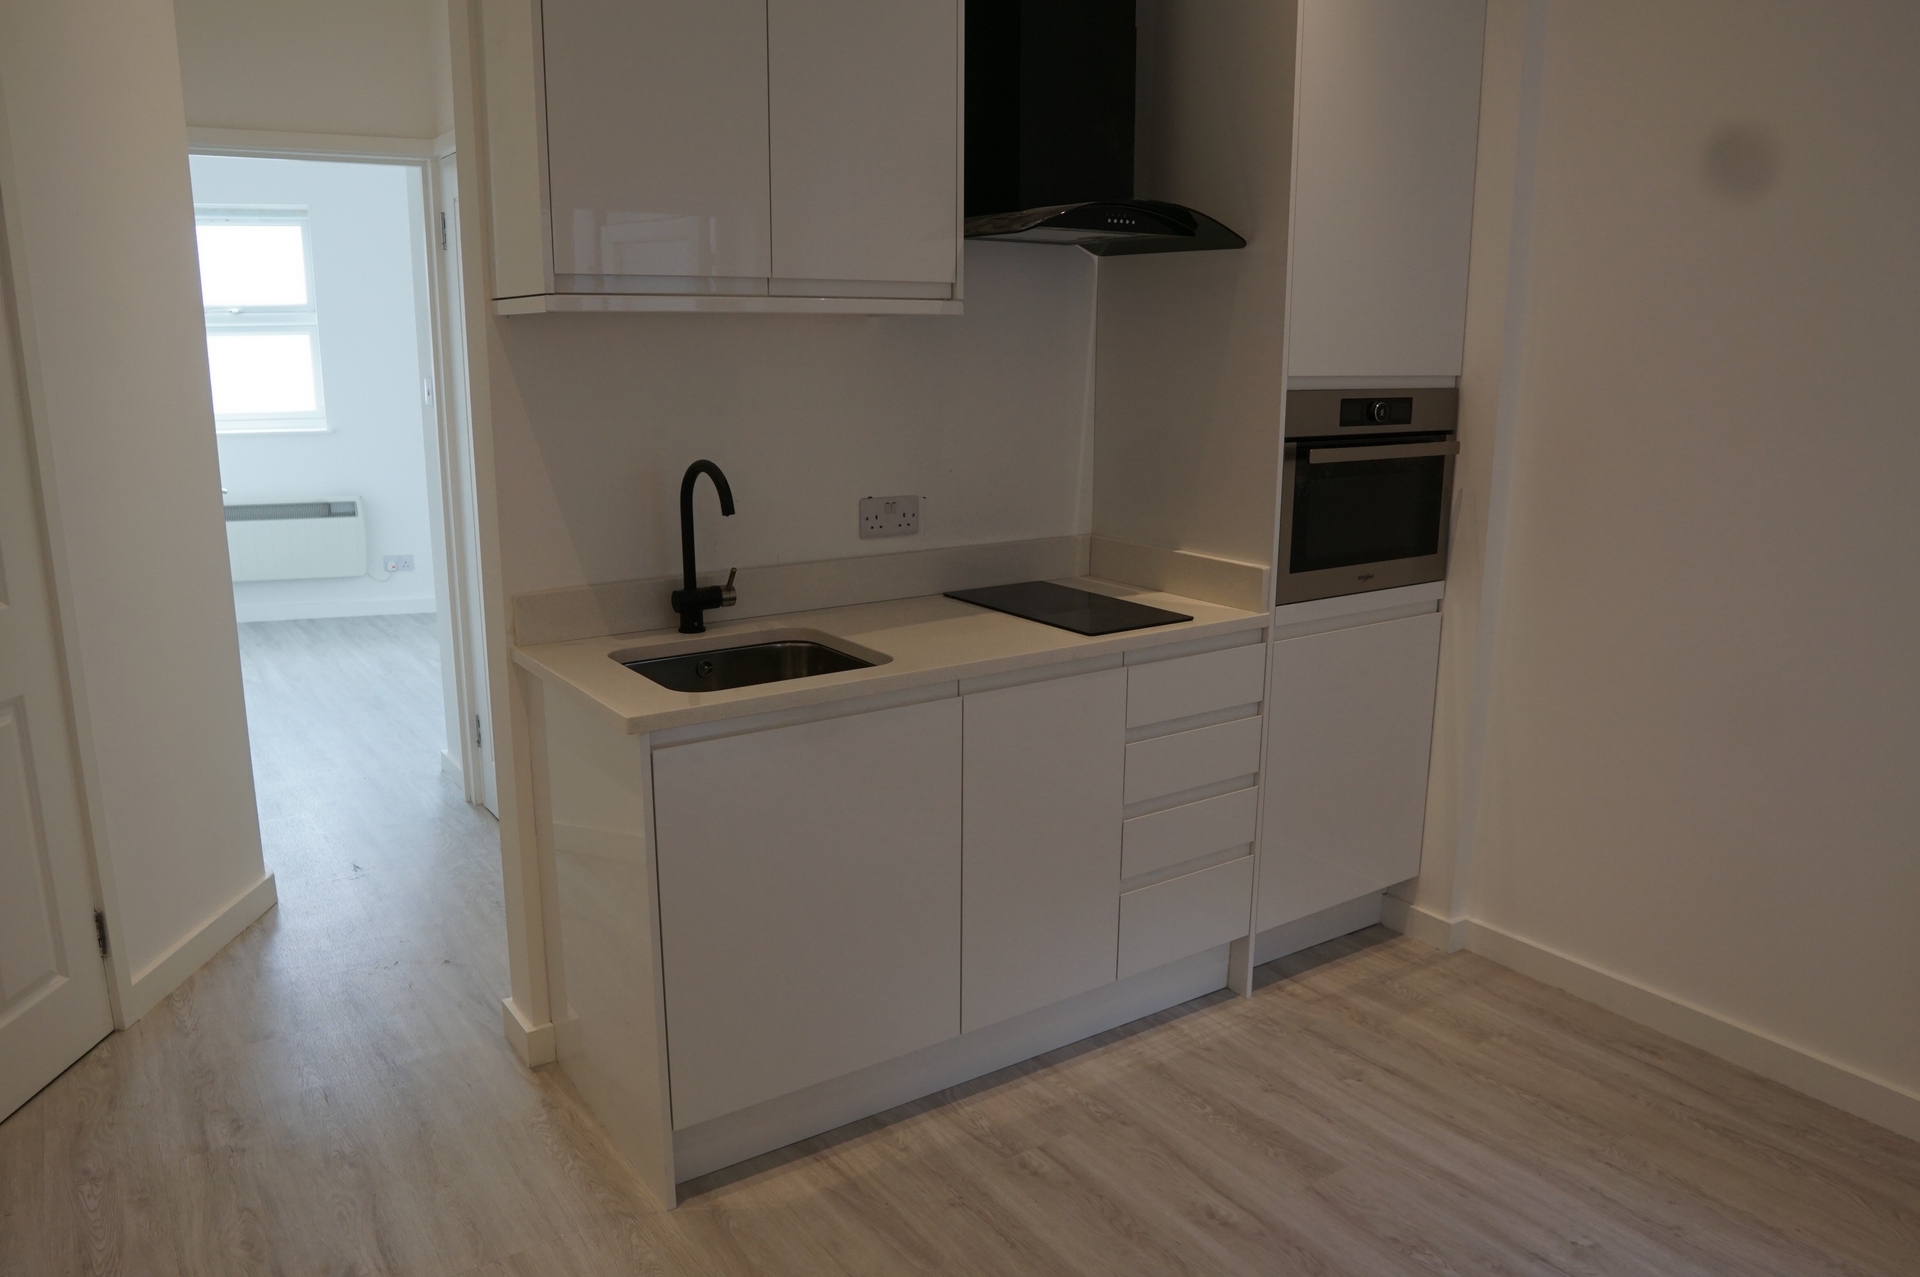 1 Bedroom Conversion to rent in Wimbledon, London, SW19